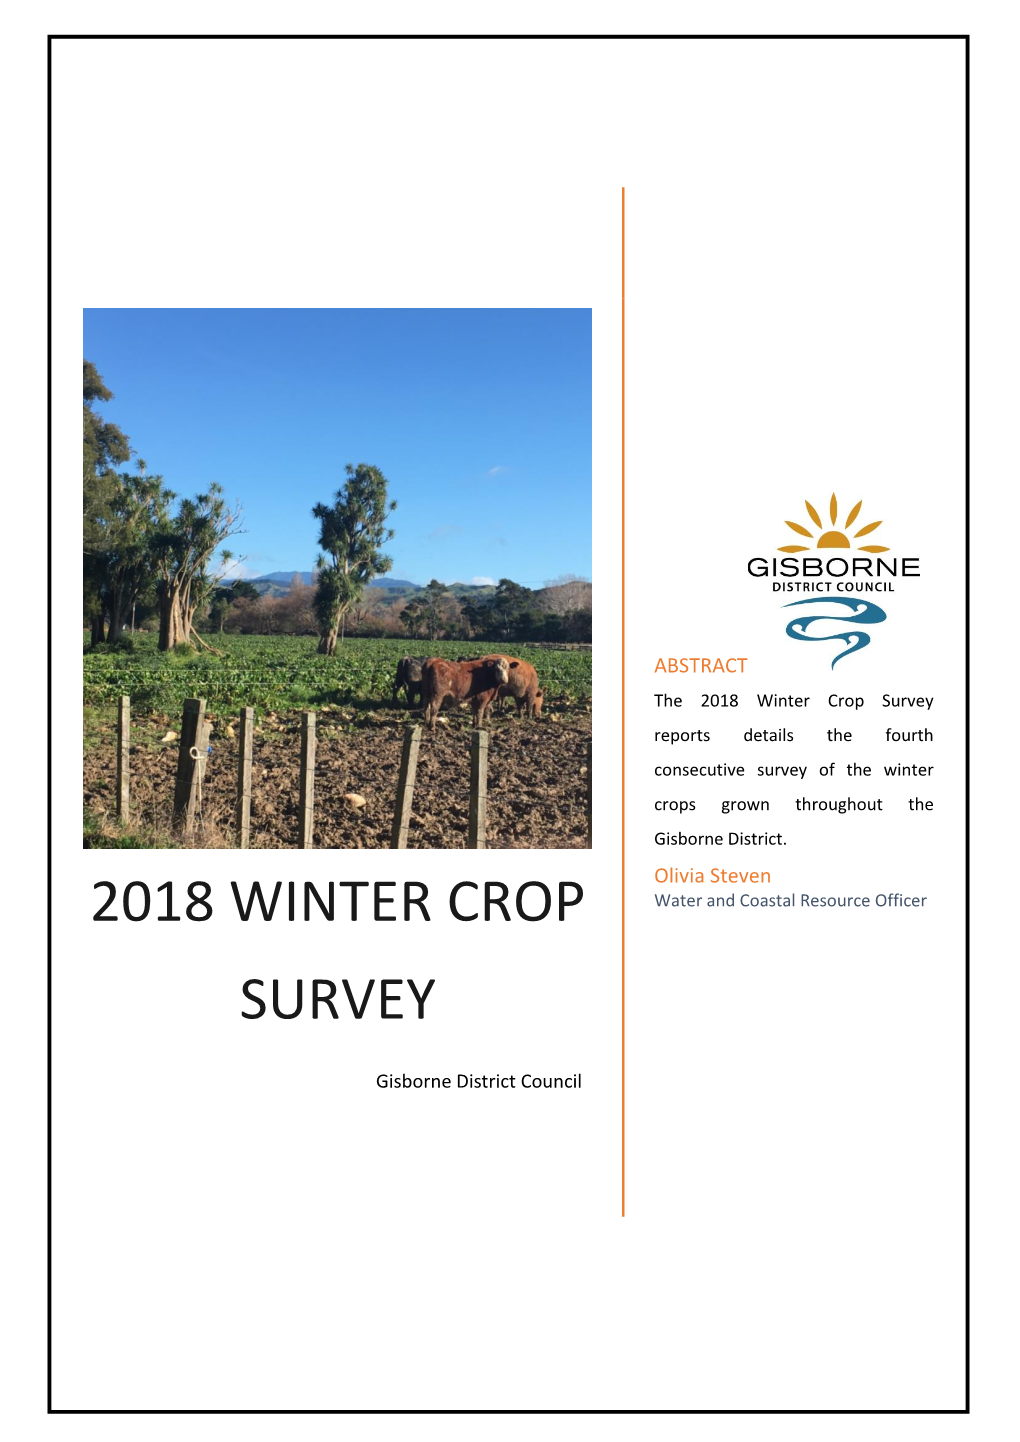 2018 Winter Crop Survey Reports Details the Fourth Consecutive Survey of the Winter Crops Grown Throughout The